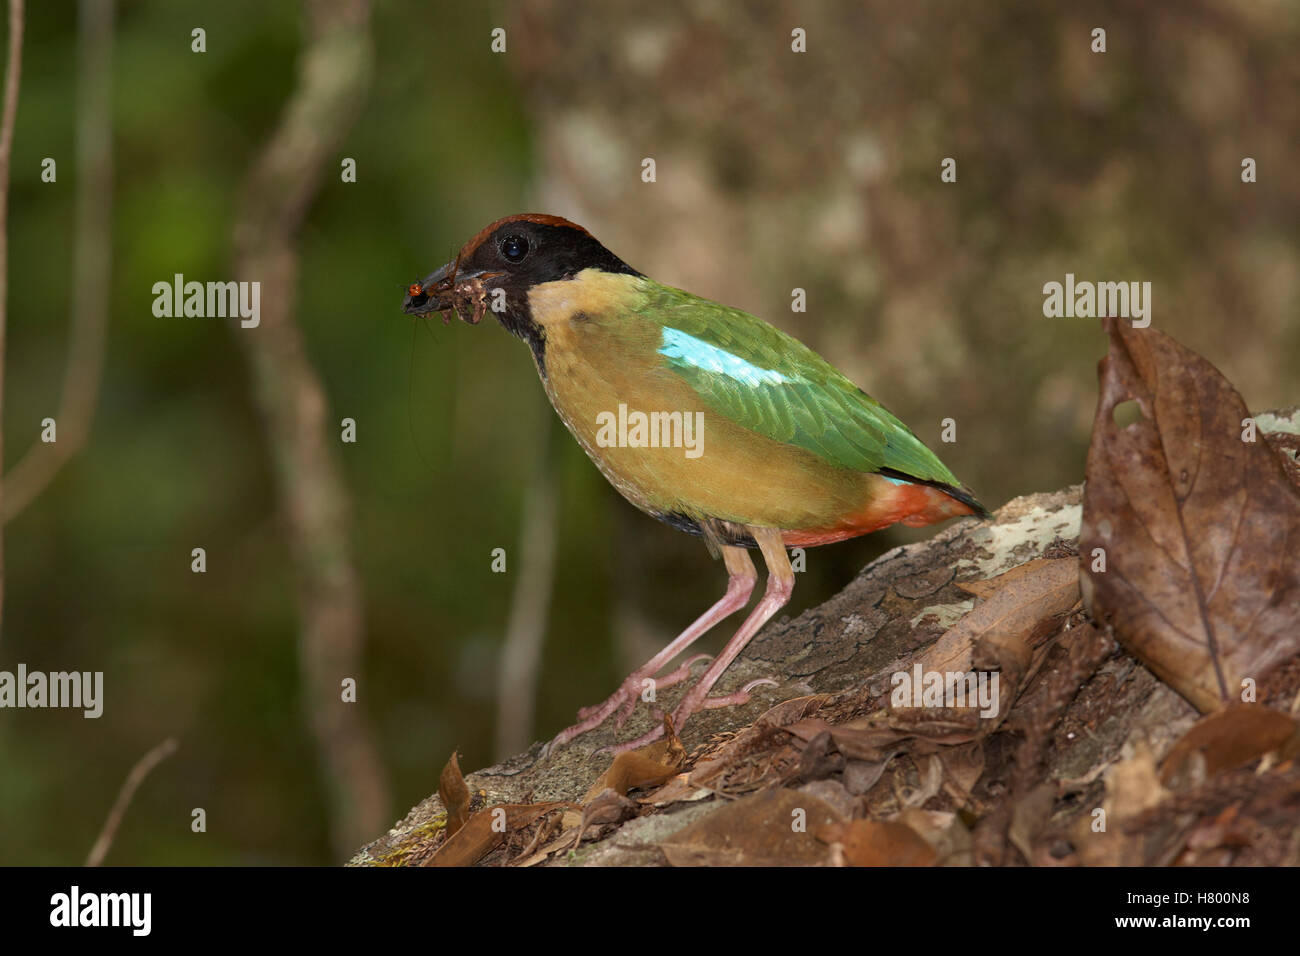 Noisy Pitta (Pitta versicolor) carrying insects to feed young, Paluma Range National Park, Queensland, Australia Stock Photo